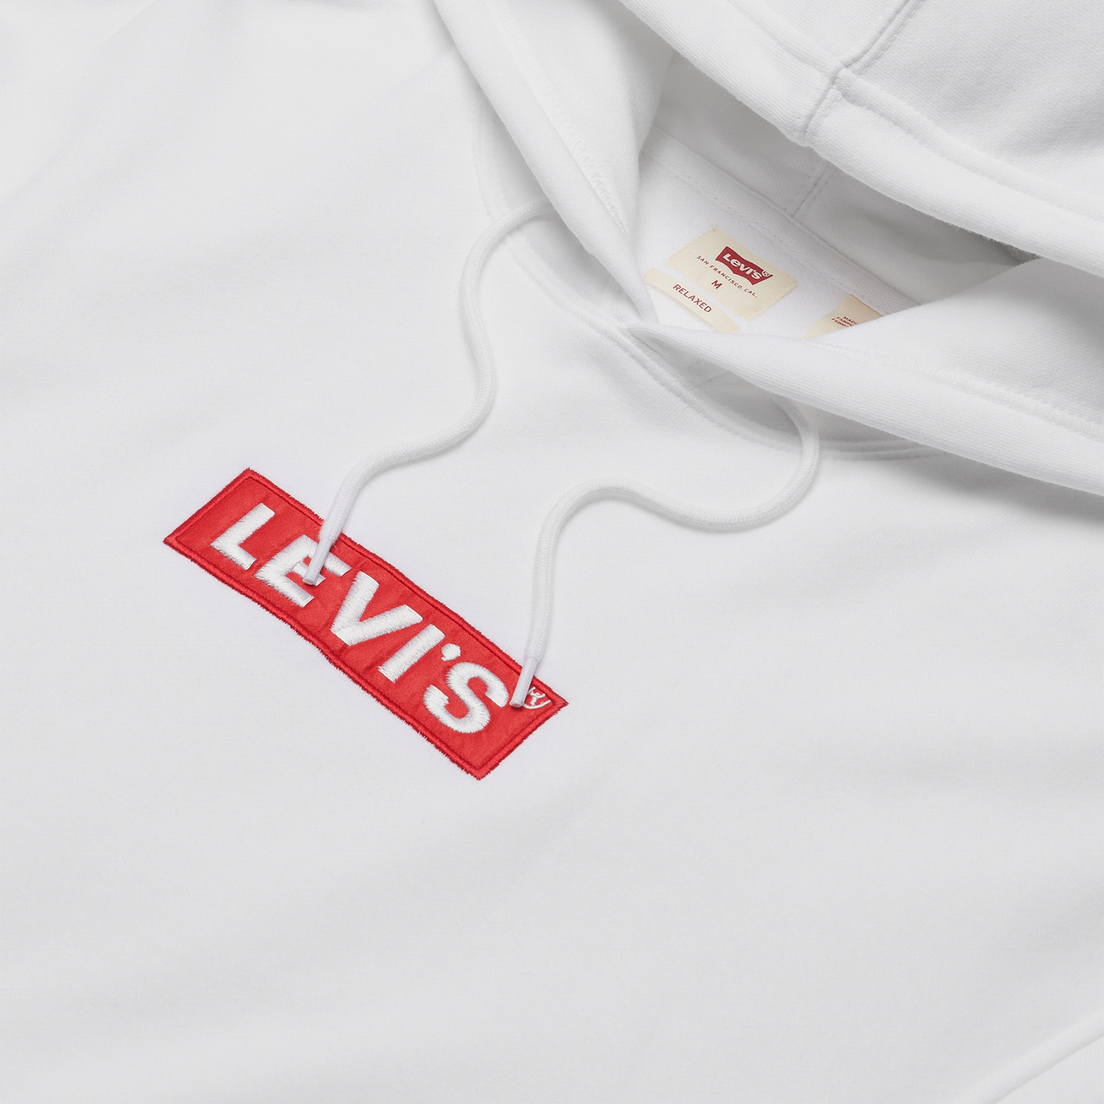 Levi's Мужская толстовка Relaxed Graphic Hoodie